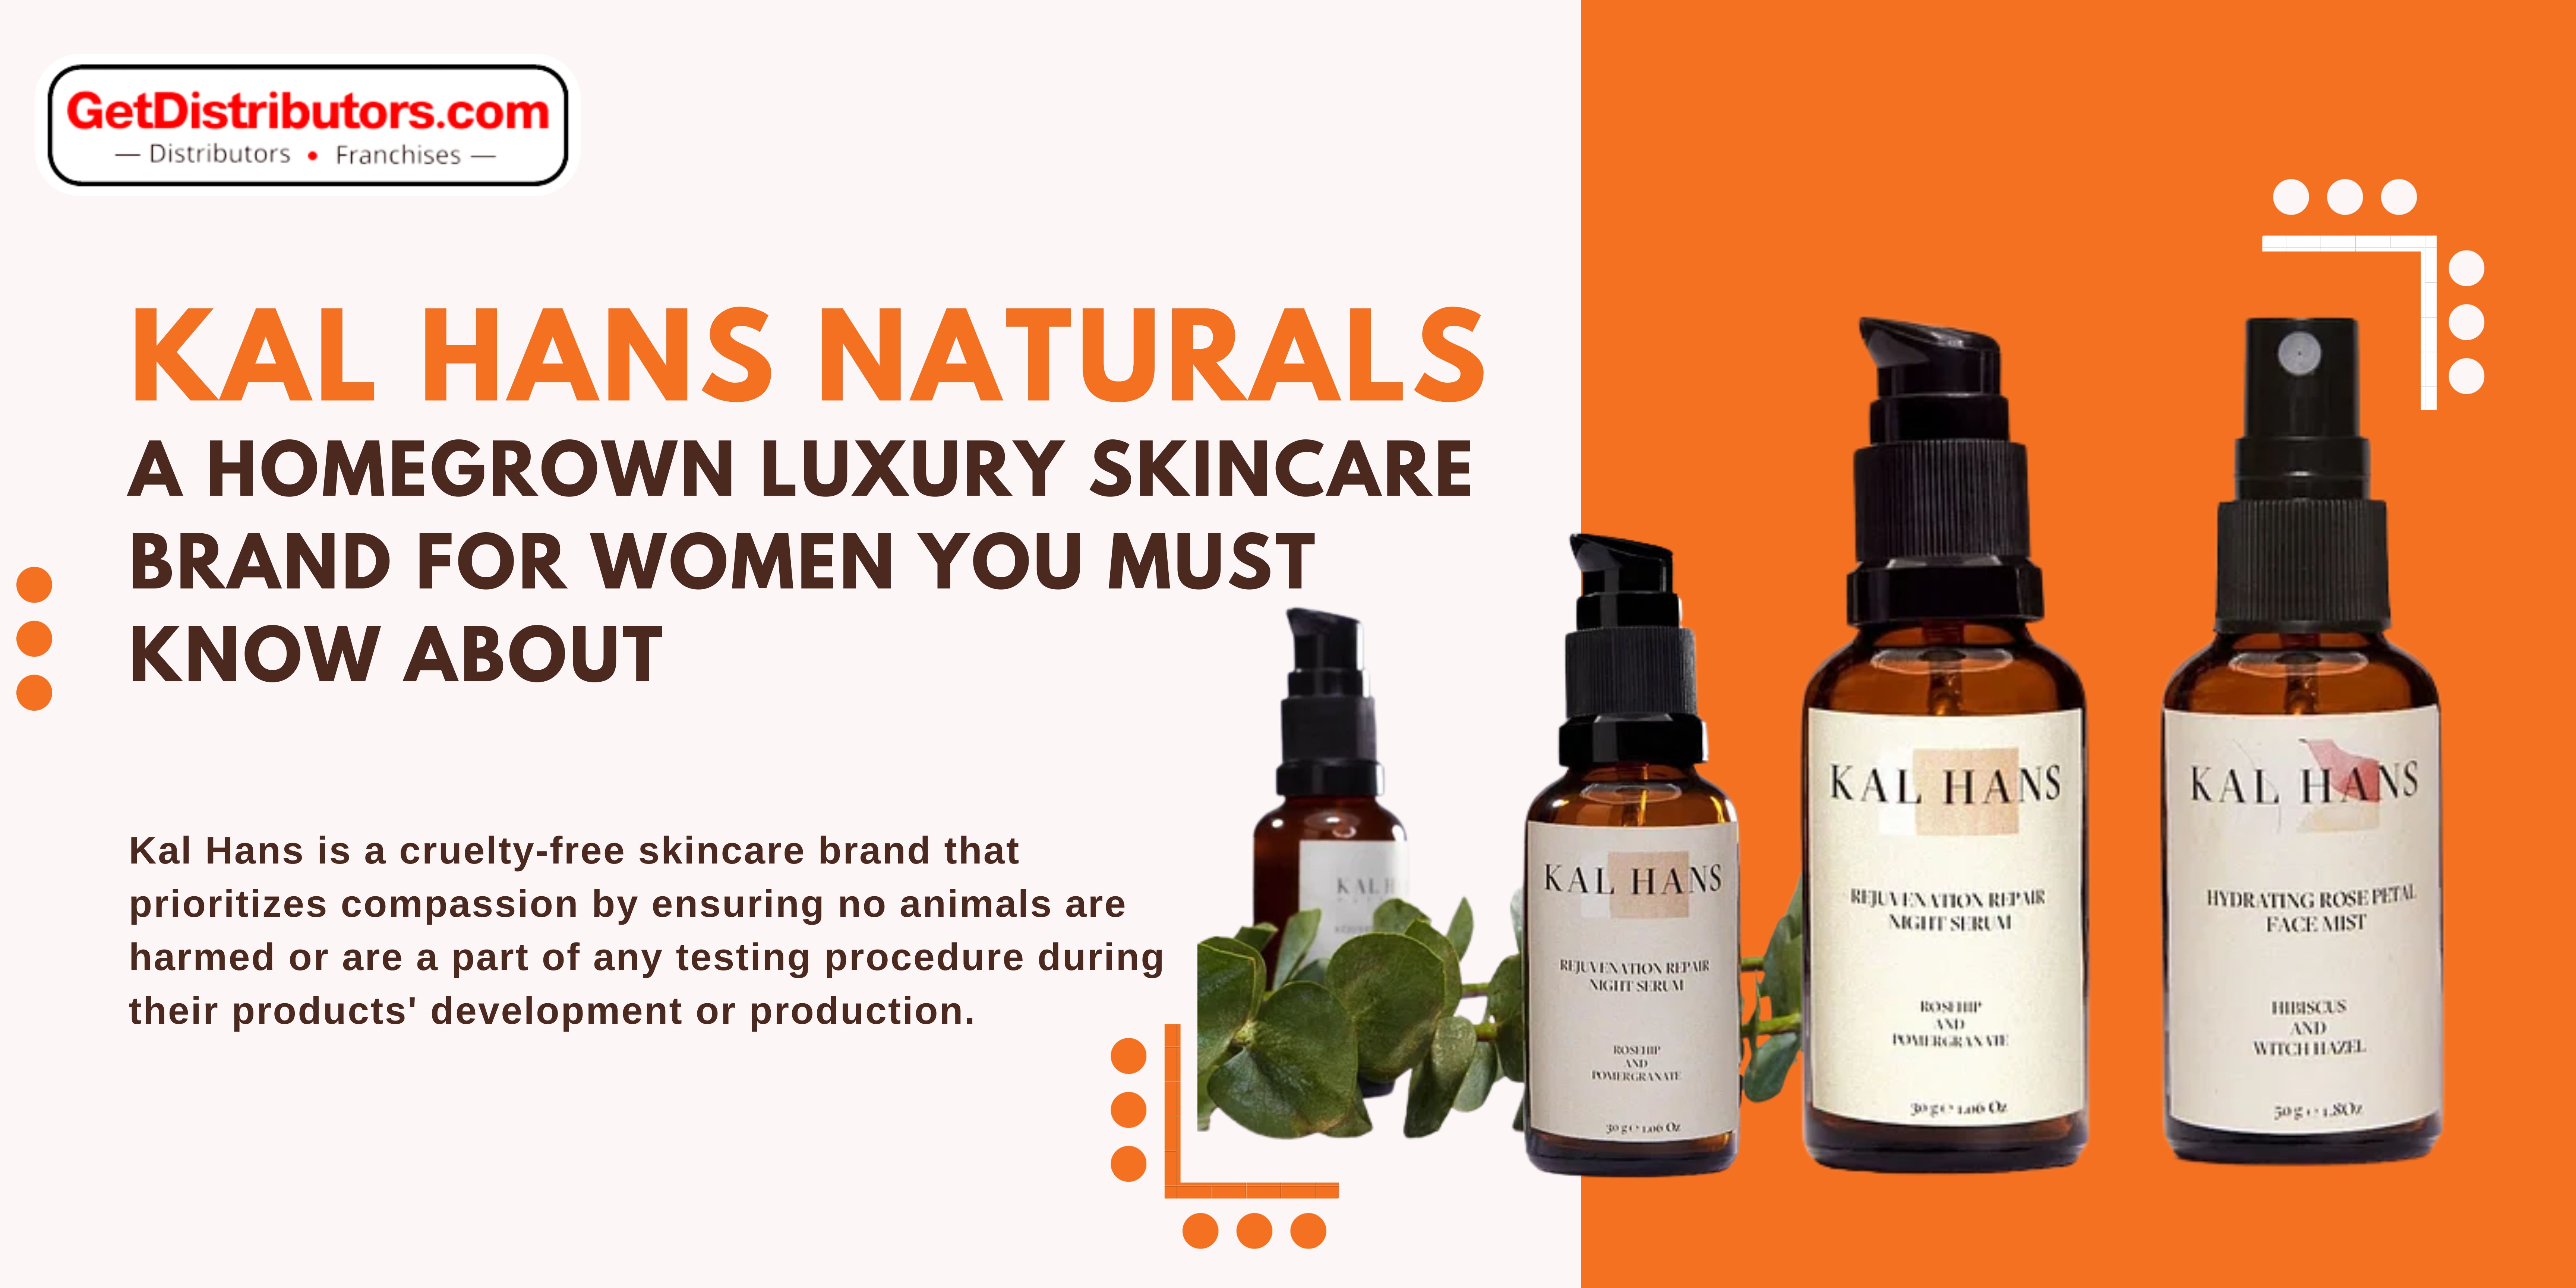 Kal Hans Naturals – A Homegrown Luxury Skincare Brand for Women You Must Know About